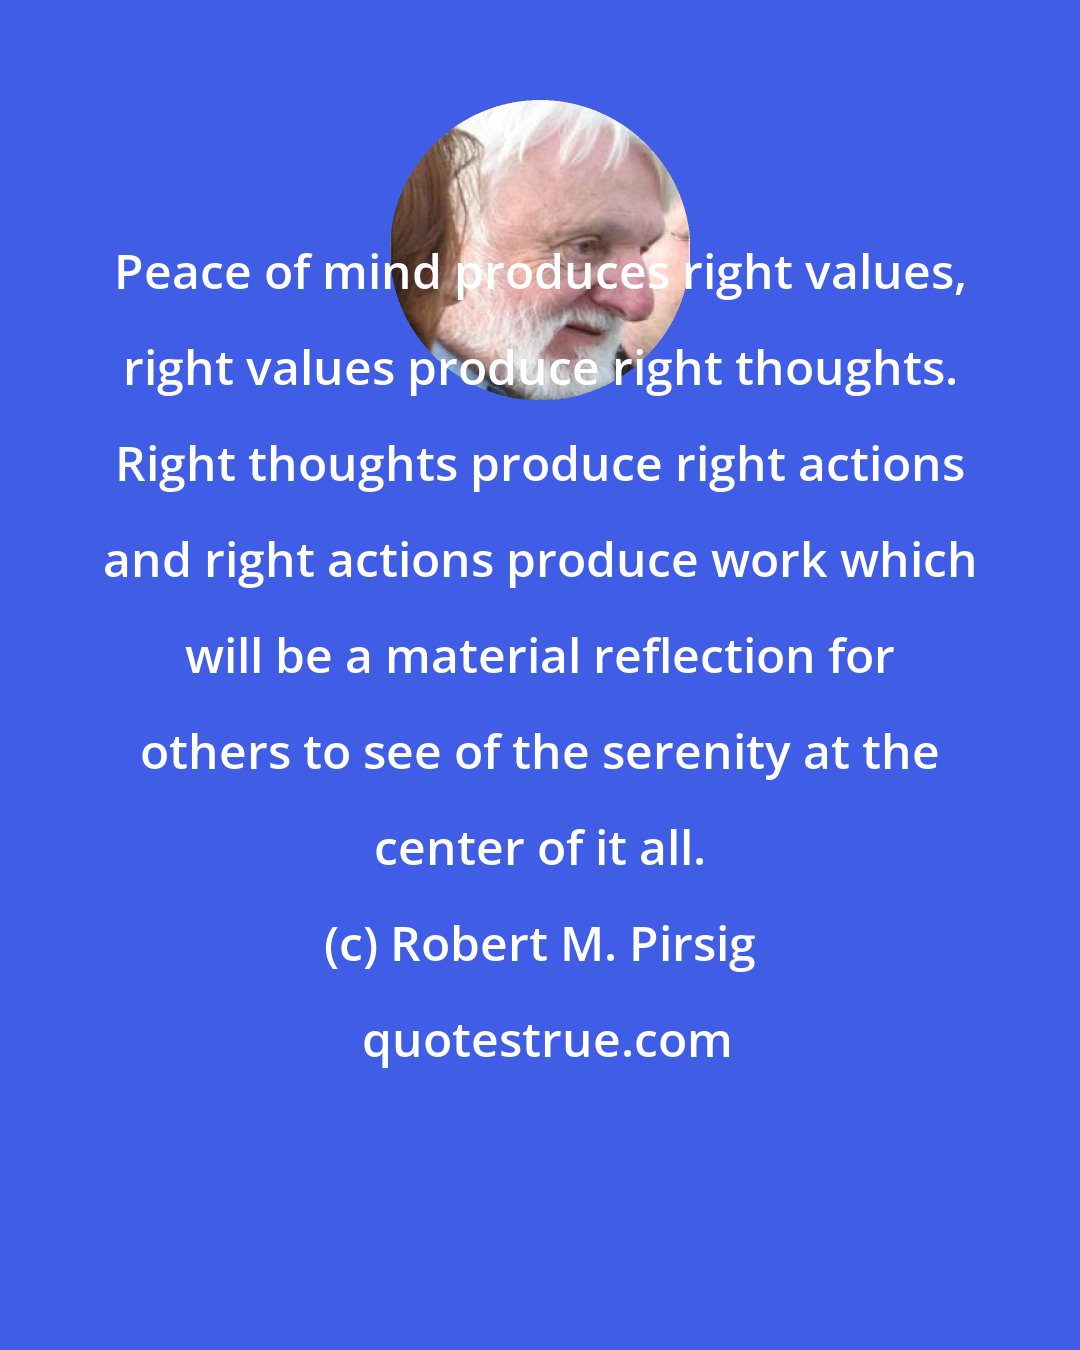 Robert M. Pirsig: Peace of mind produces right values, right values produce right thoughts. Right thoughts produce right actions and right actions produce work which will be a material reflection for others to see of the serenity at the center of it all.